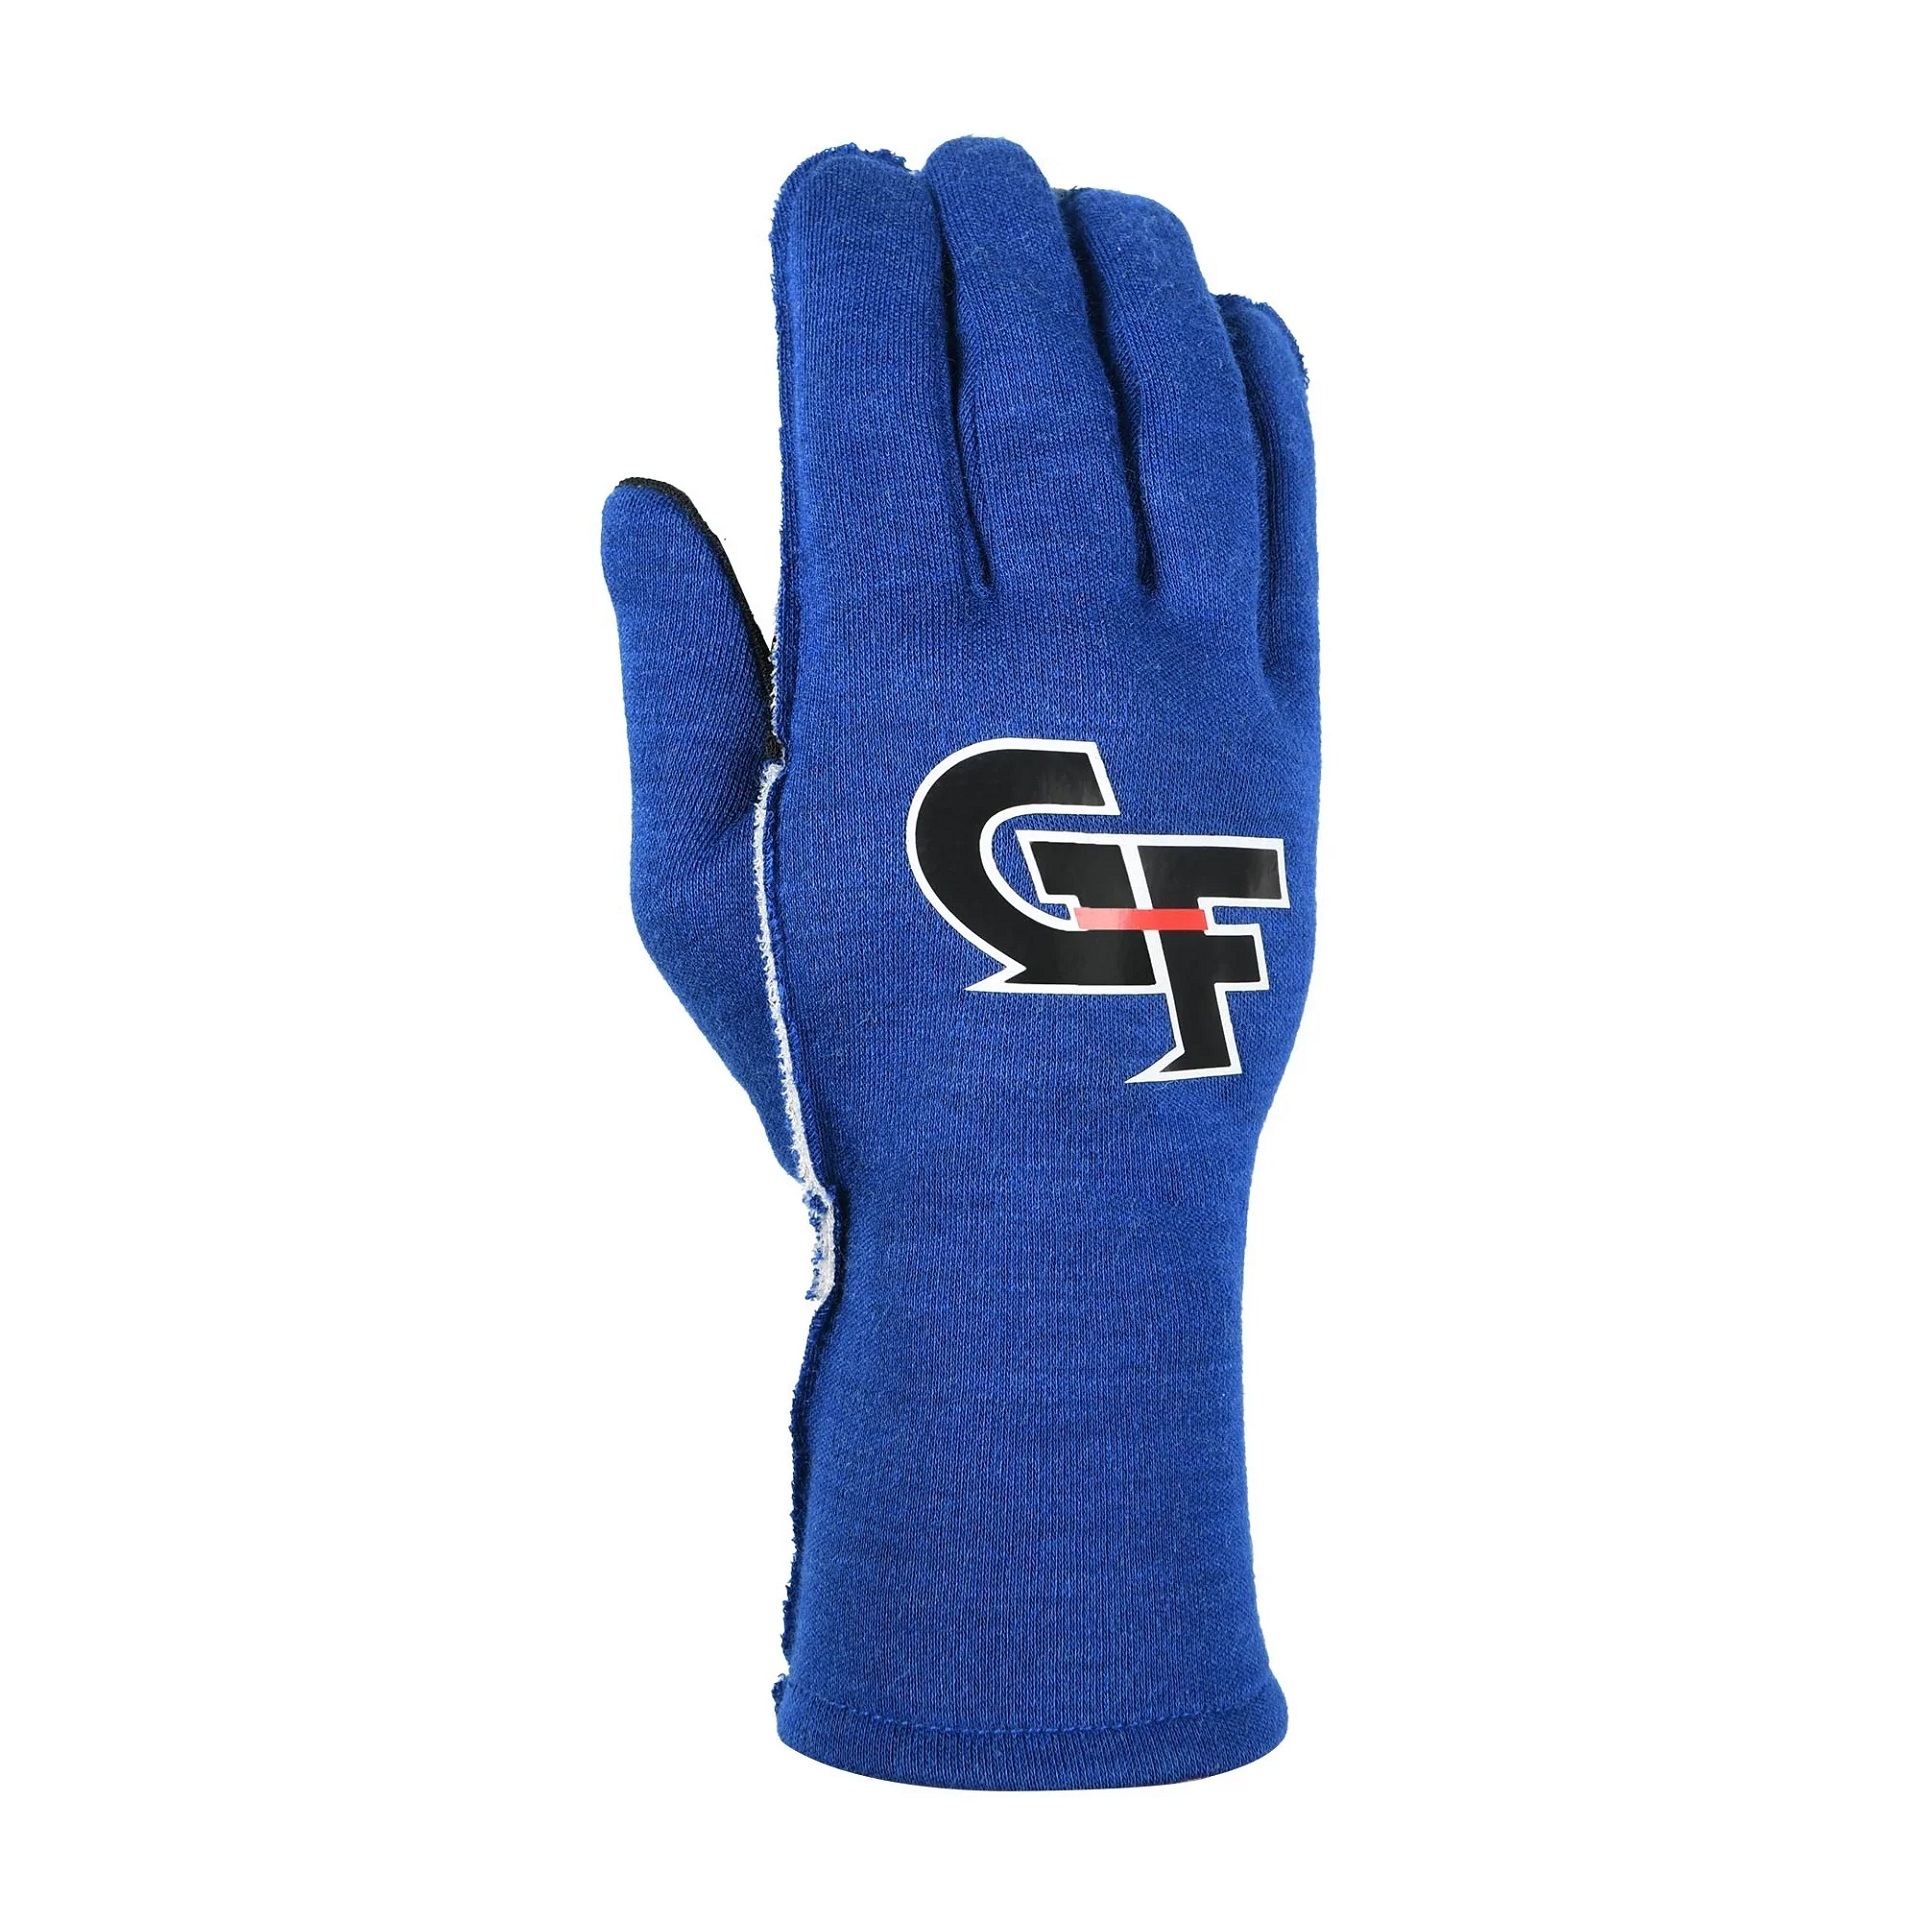 G-Force Racing Gear 54000MEDBU Driving Gloves, G-Limit RS, Double Layer, SFI 3.3/5, Nomex, Blue, Medium, Pair